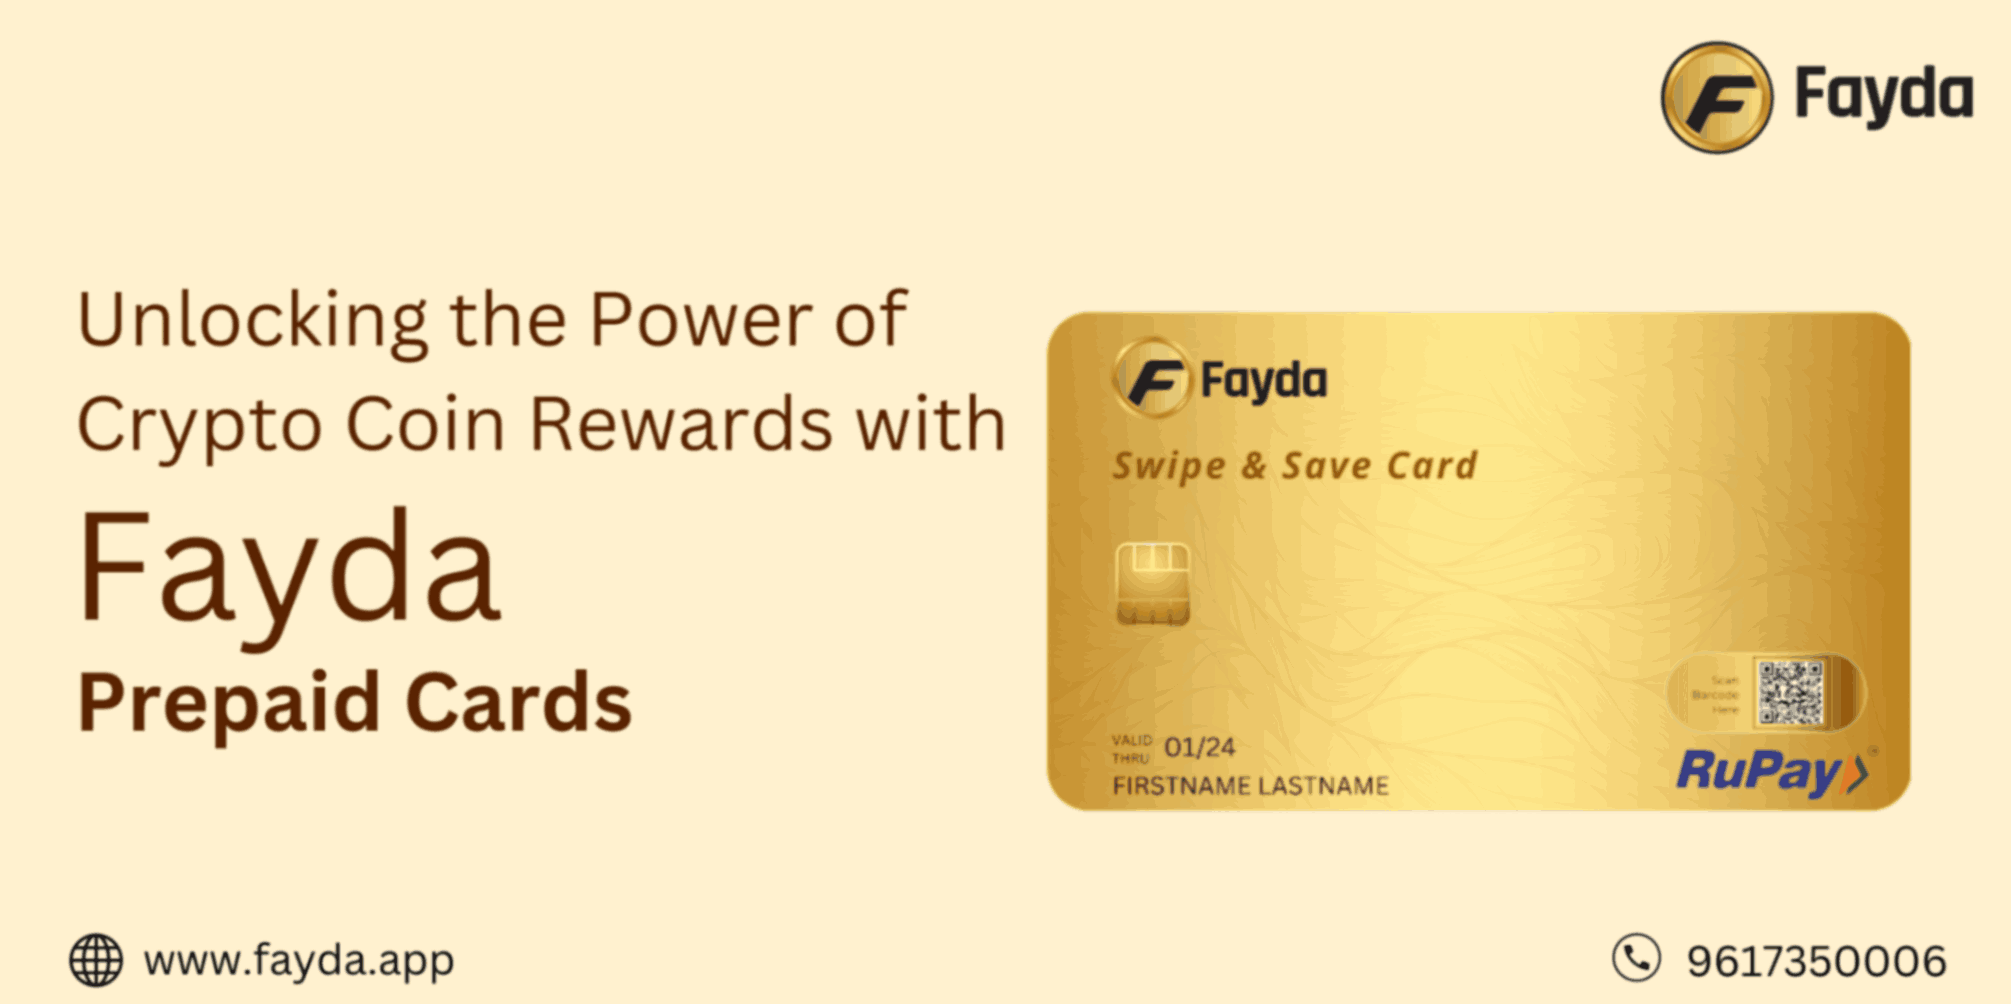 Unlocking the Power of Crypto Coin Rewards with Fayda Prepaid Card